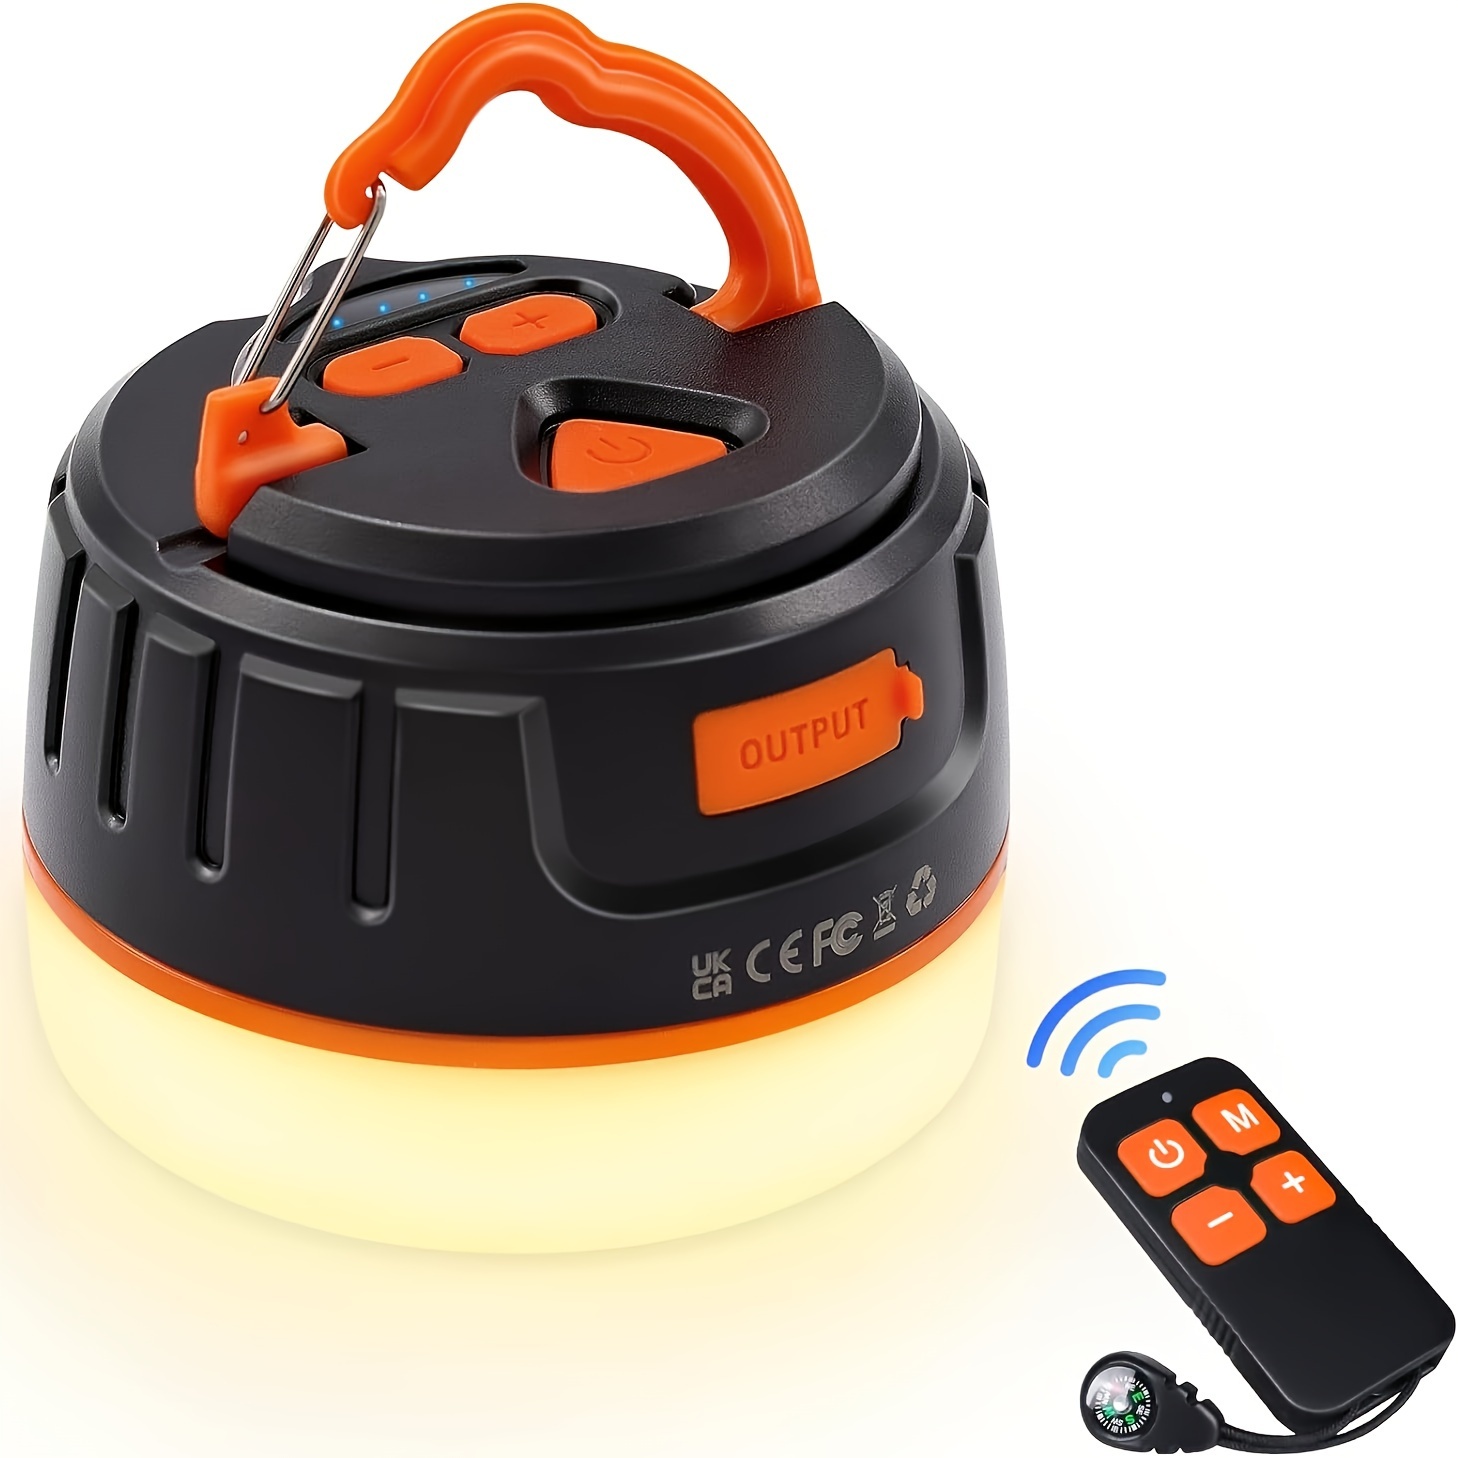 Rechargeable Led Camping Lantern With Remote 150 Hours Lasting